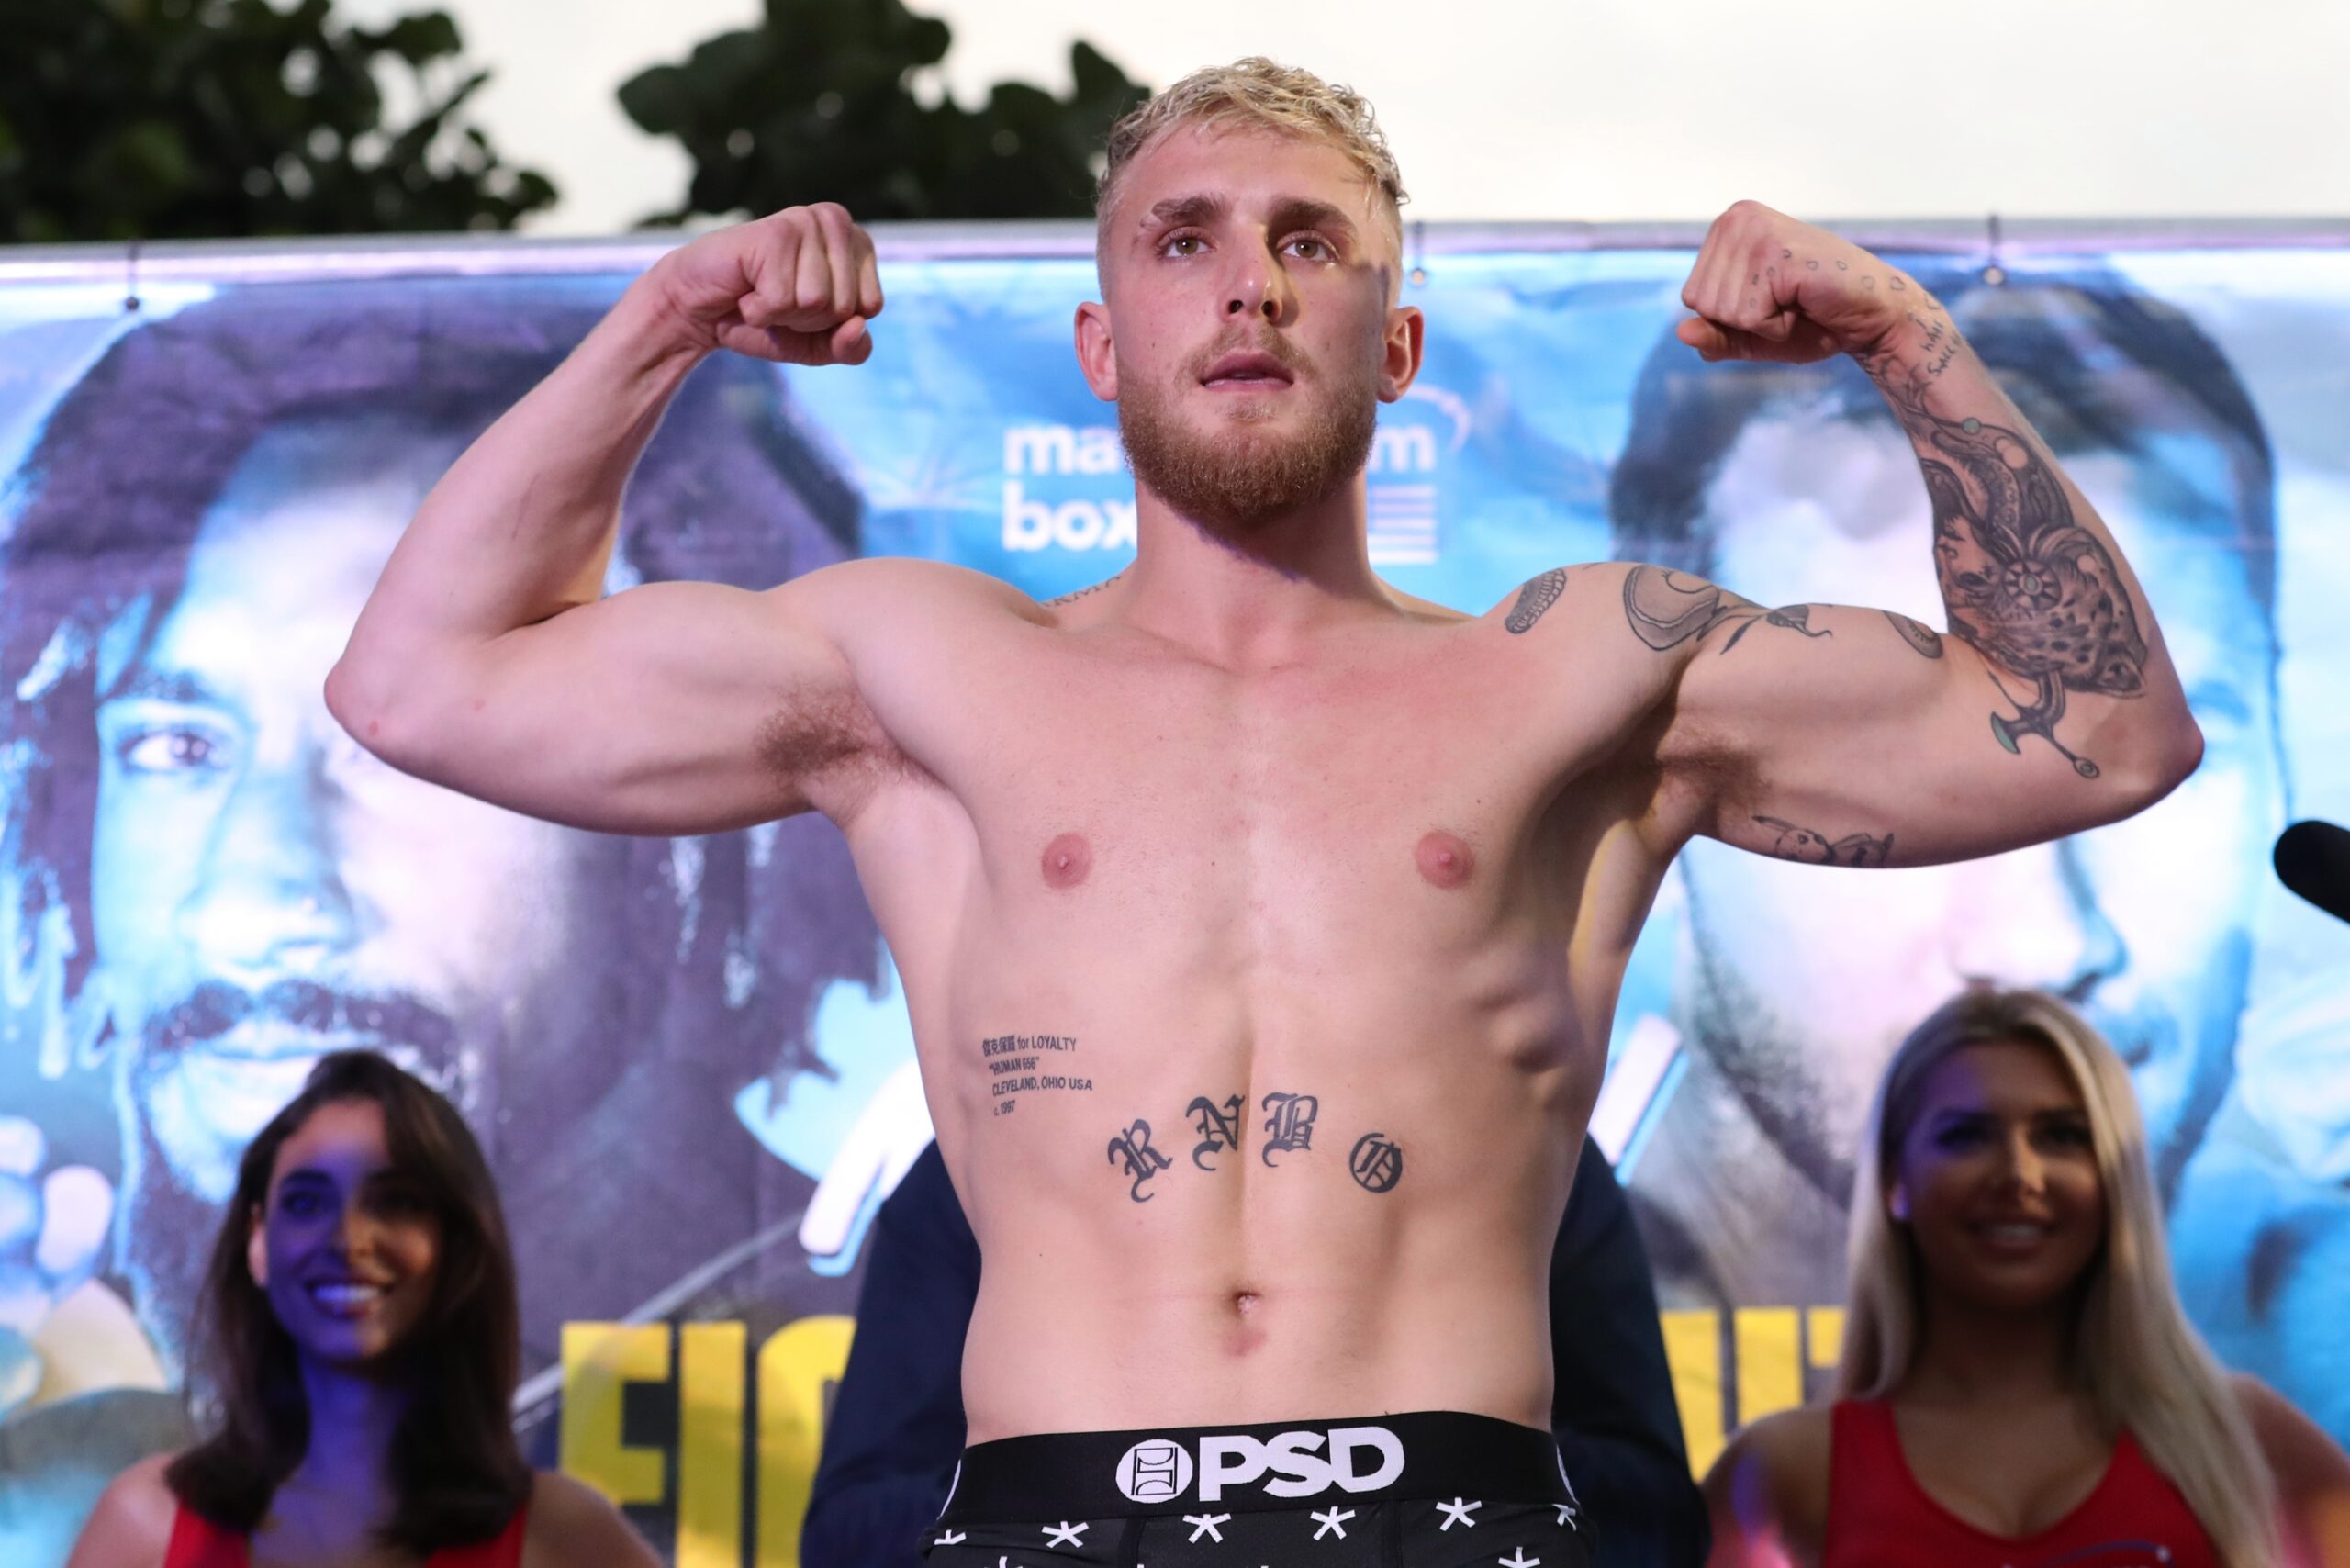 Jake Paul Offers $50M to Challenge Conor McGregor, Insults His Wife